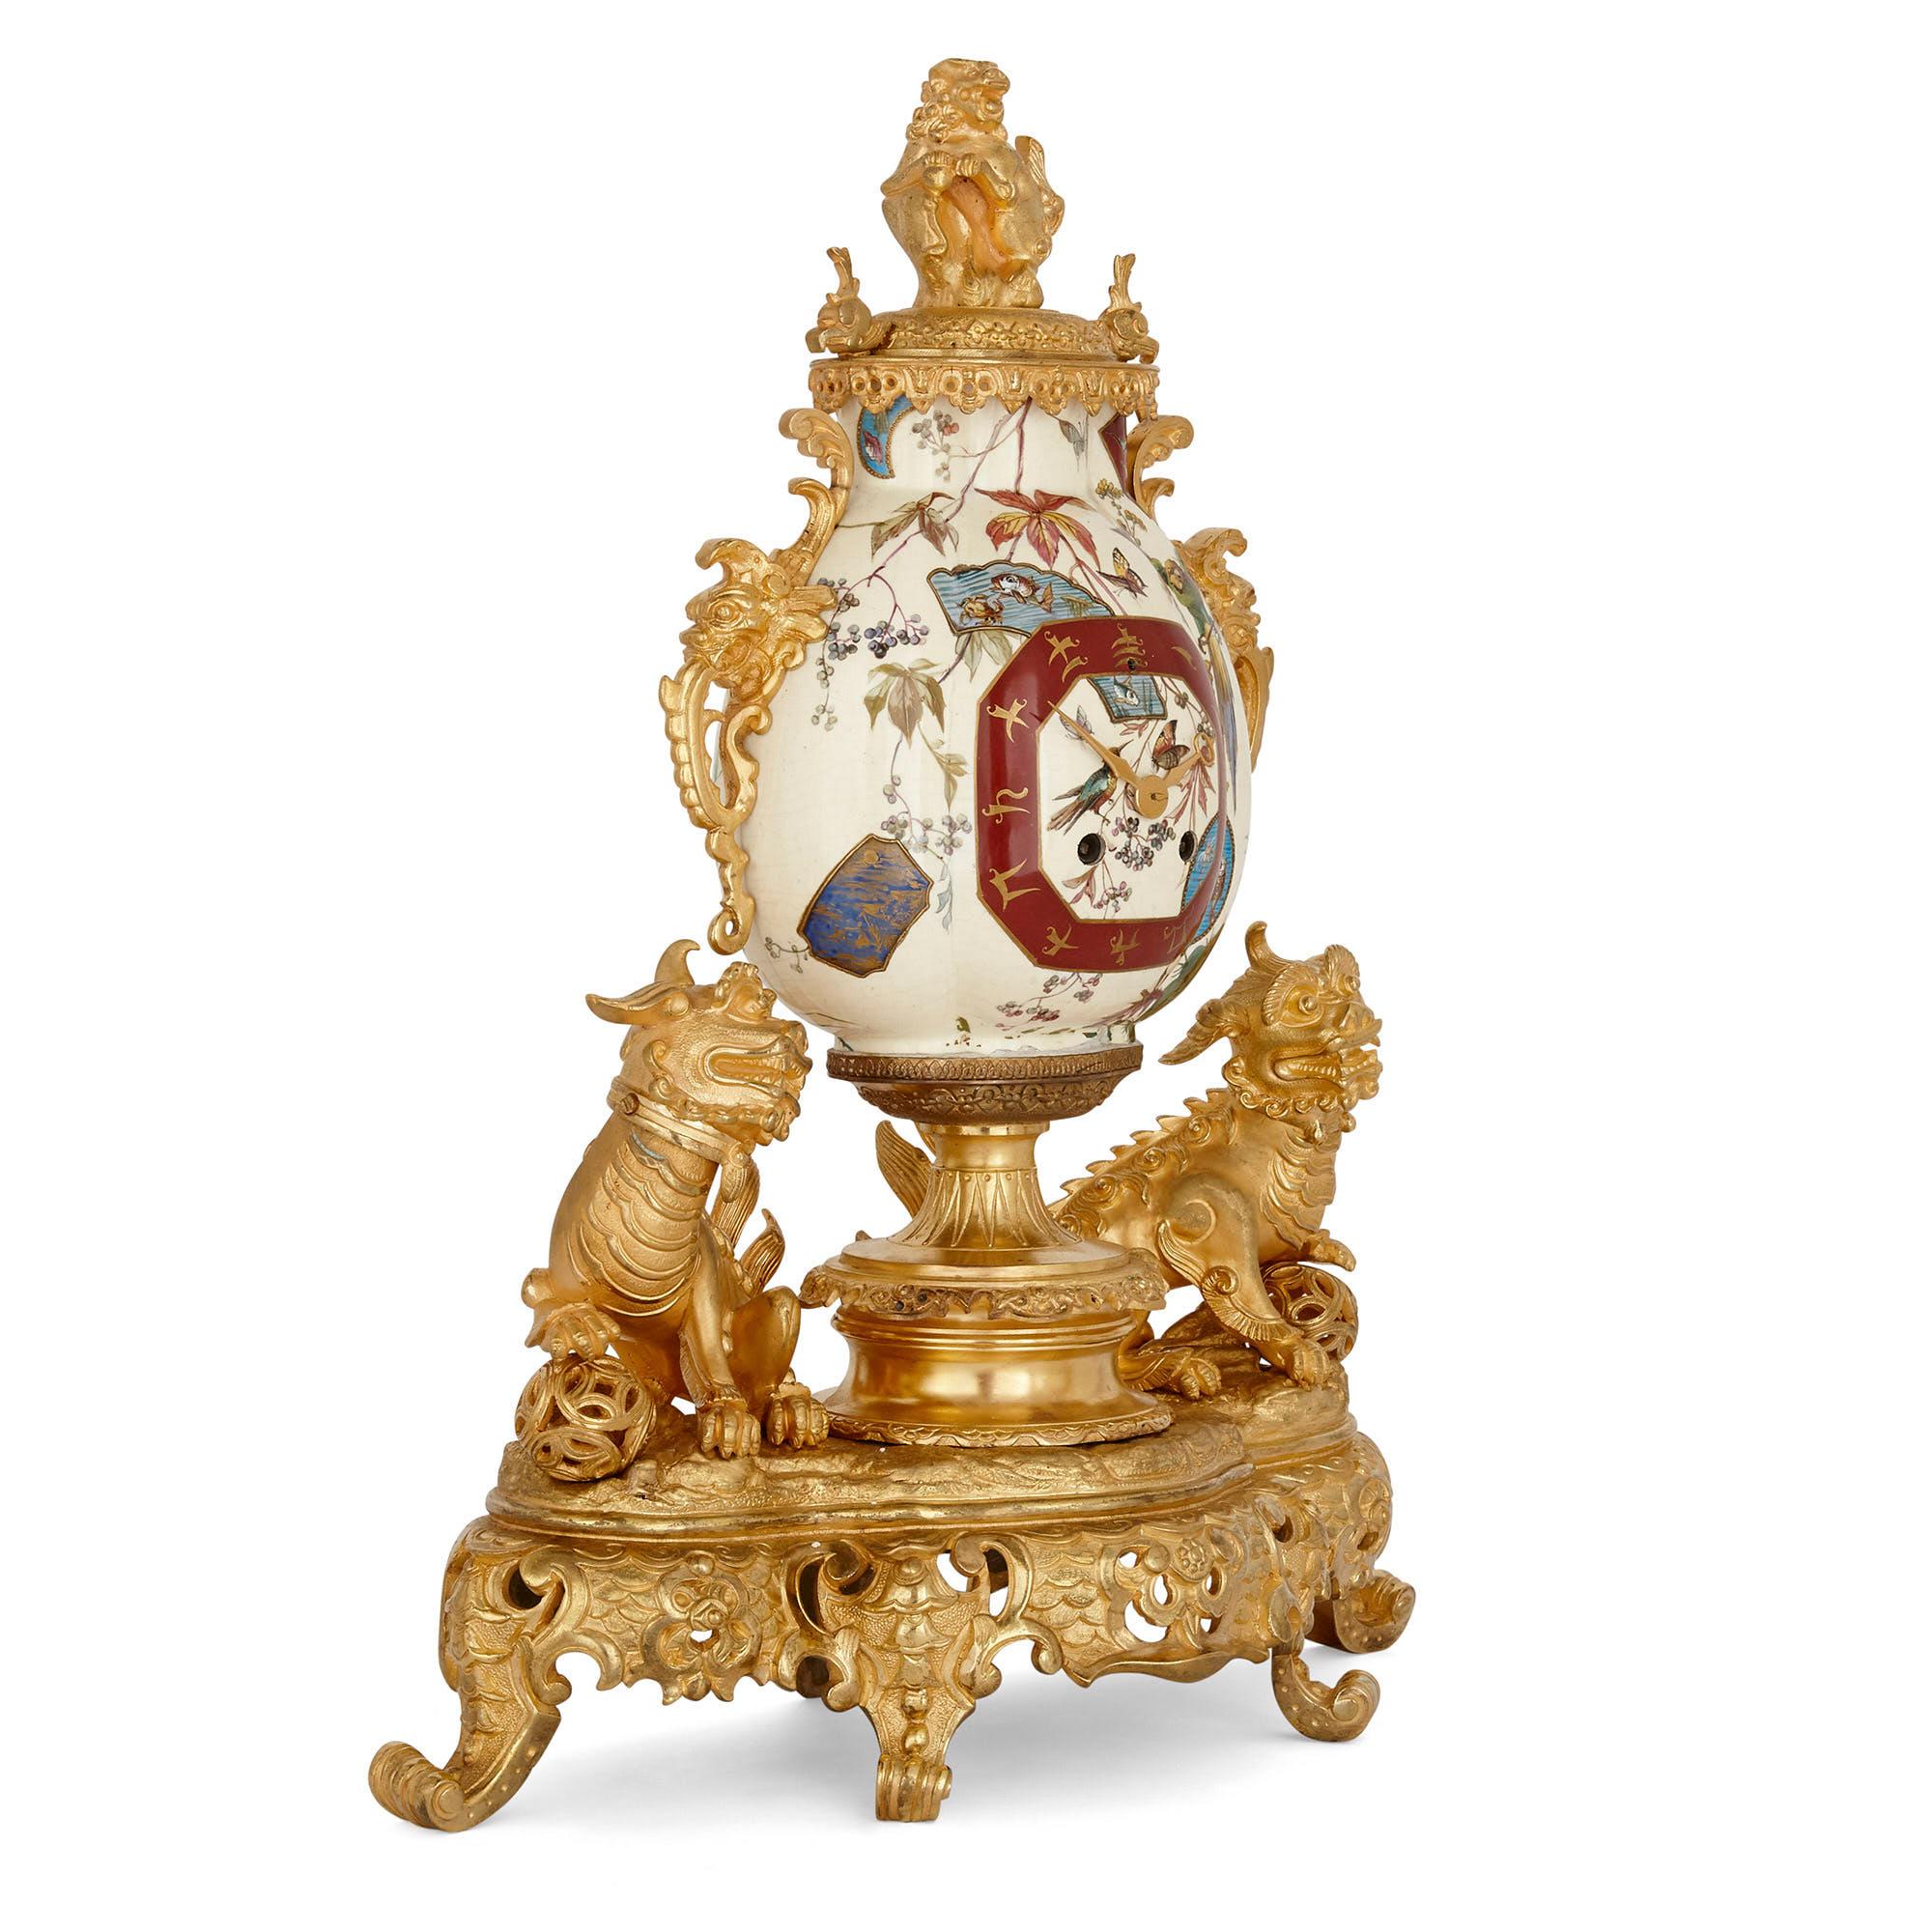 French gilt bronze and faience clock set in the chinoiserie style
French, late 19th century
Clock: Height 52cm, width 43cm, depth 18cm
Candelabra: Height 53cm, width 26cm, depth 18cm

This wonderful clock set, comprised of a mantel clock and